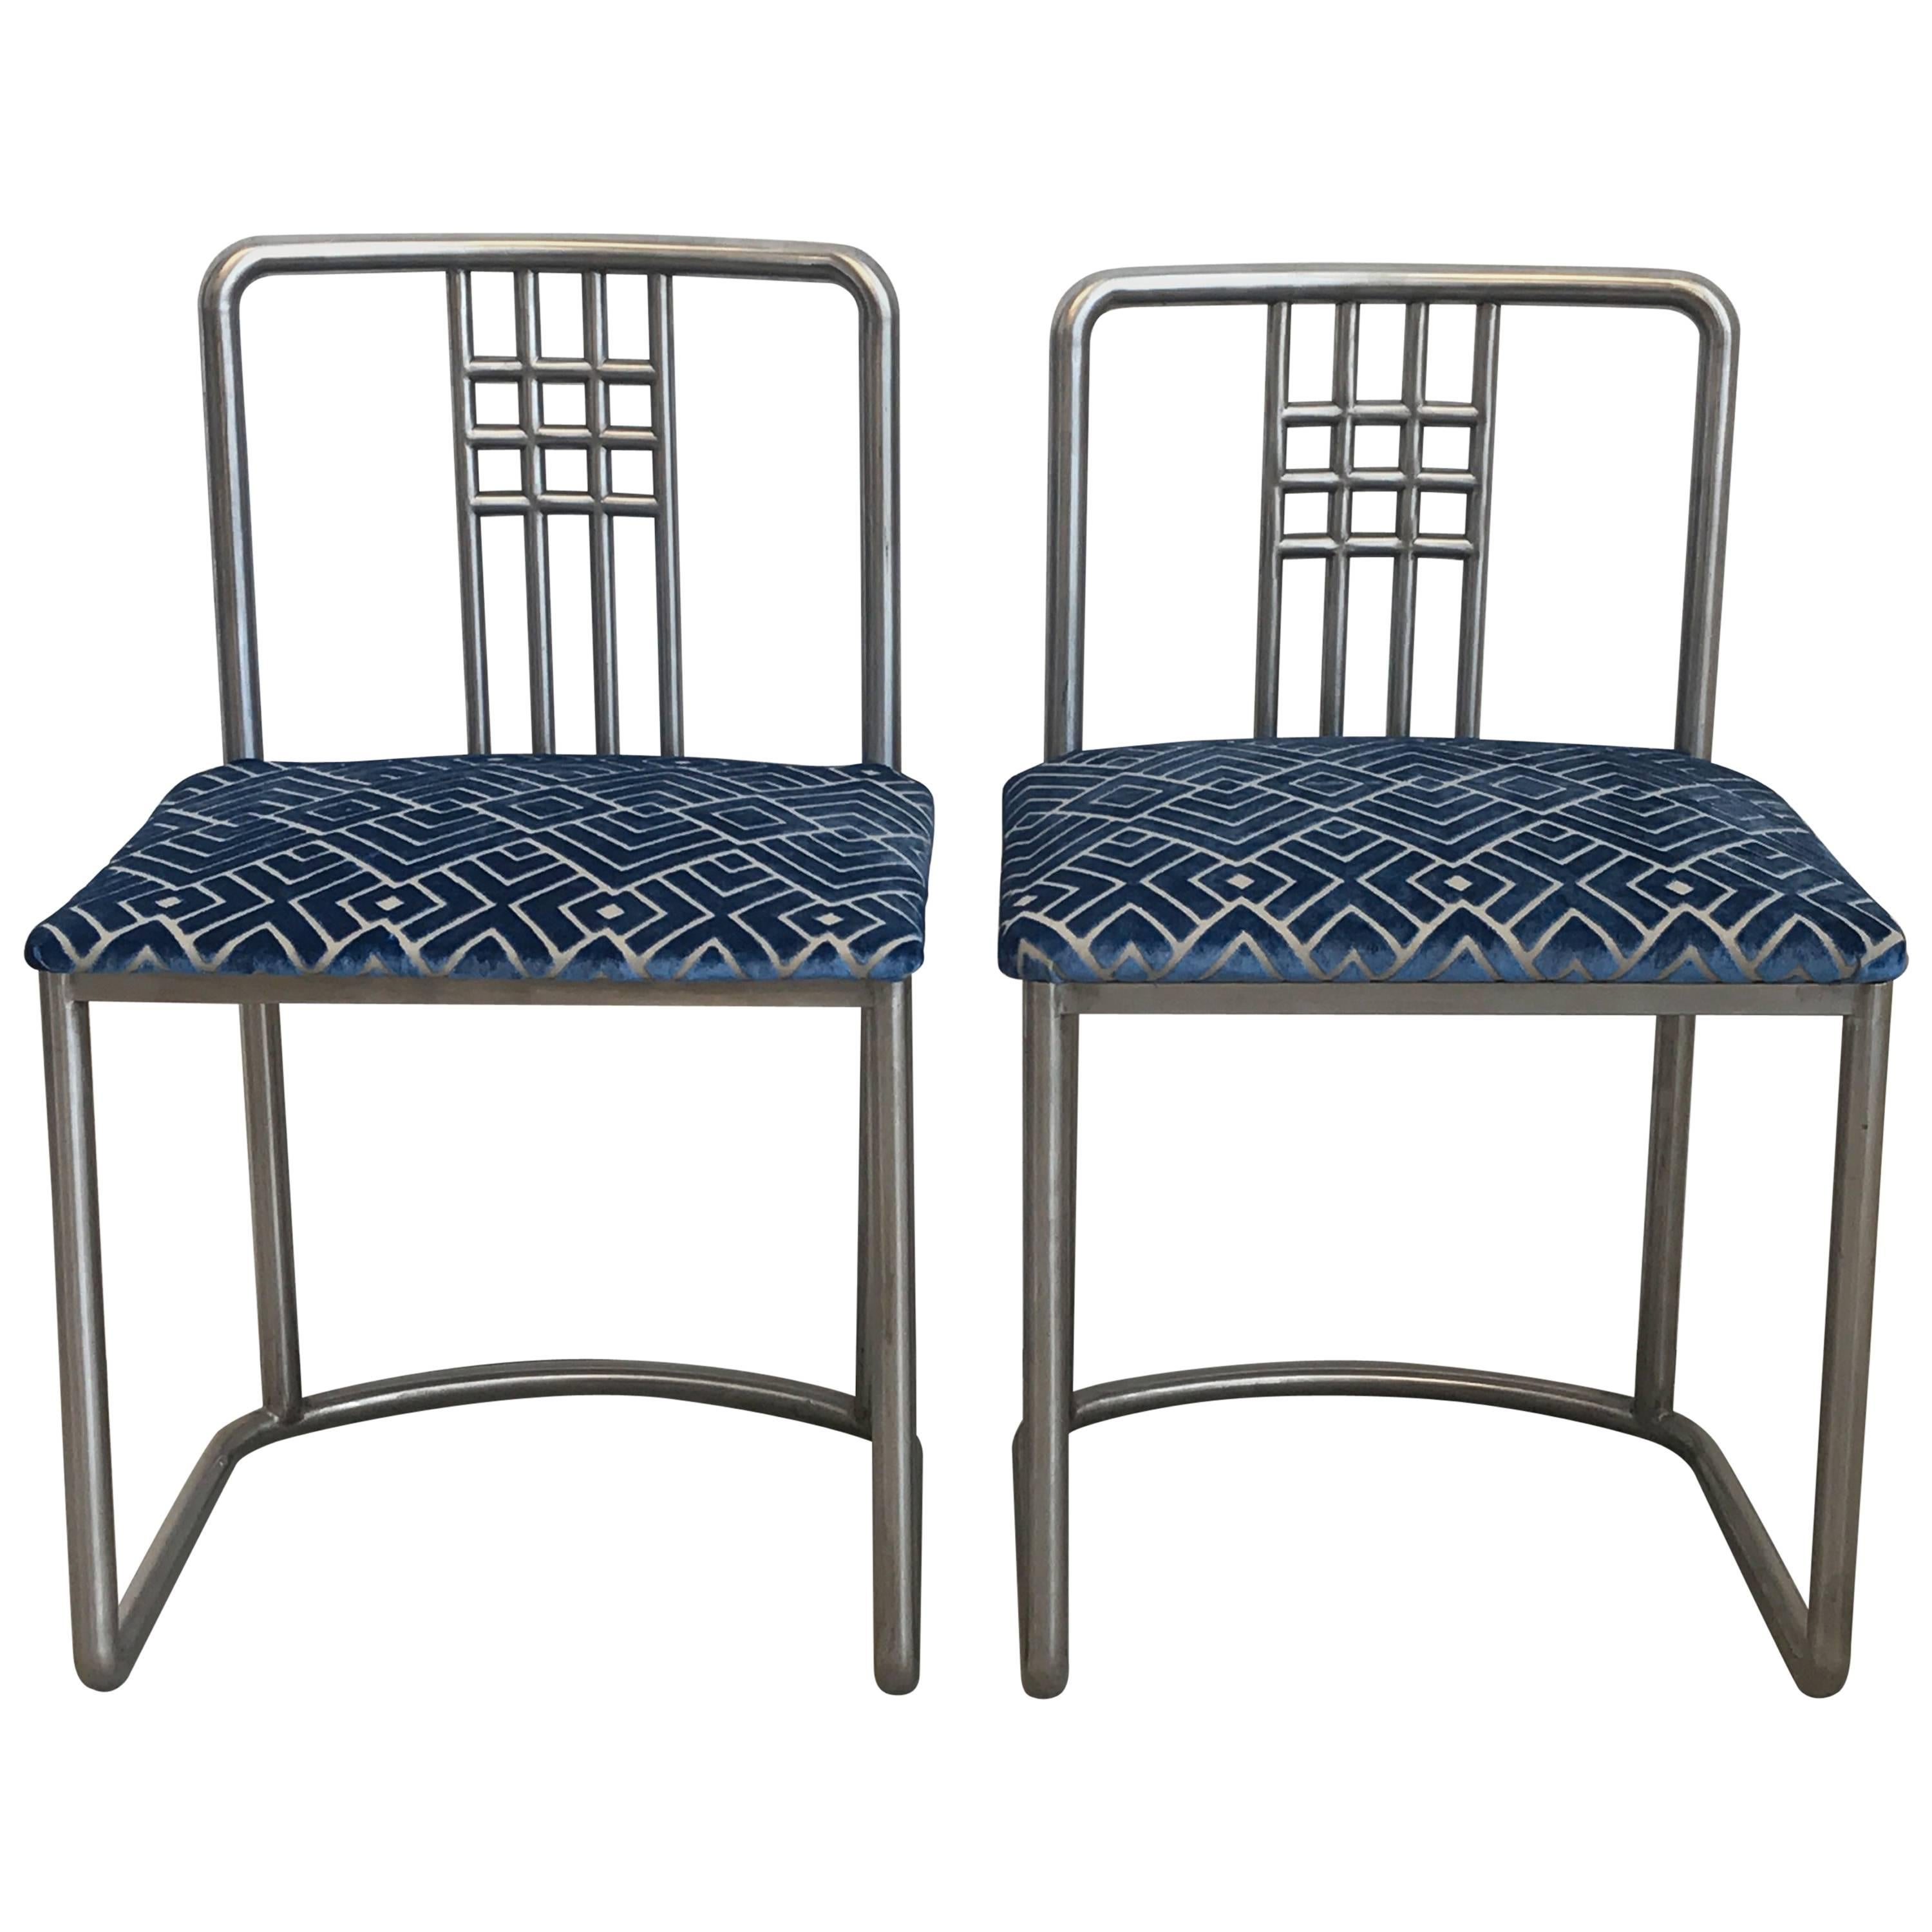 1970s Frank Lloyd Wright Style Stainless Steel Chairs with Blue Velvet, Pair